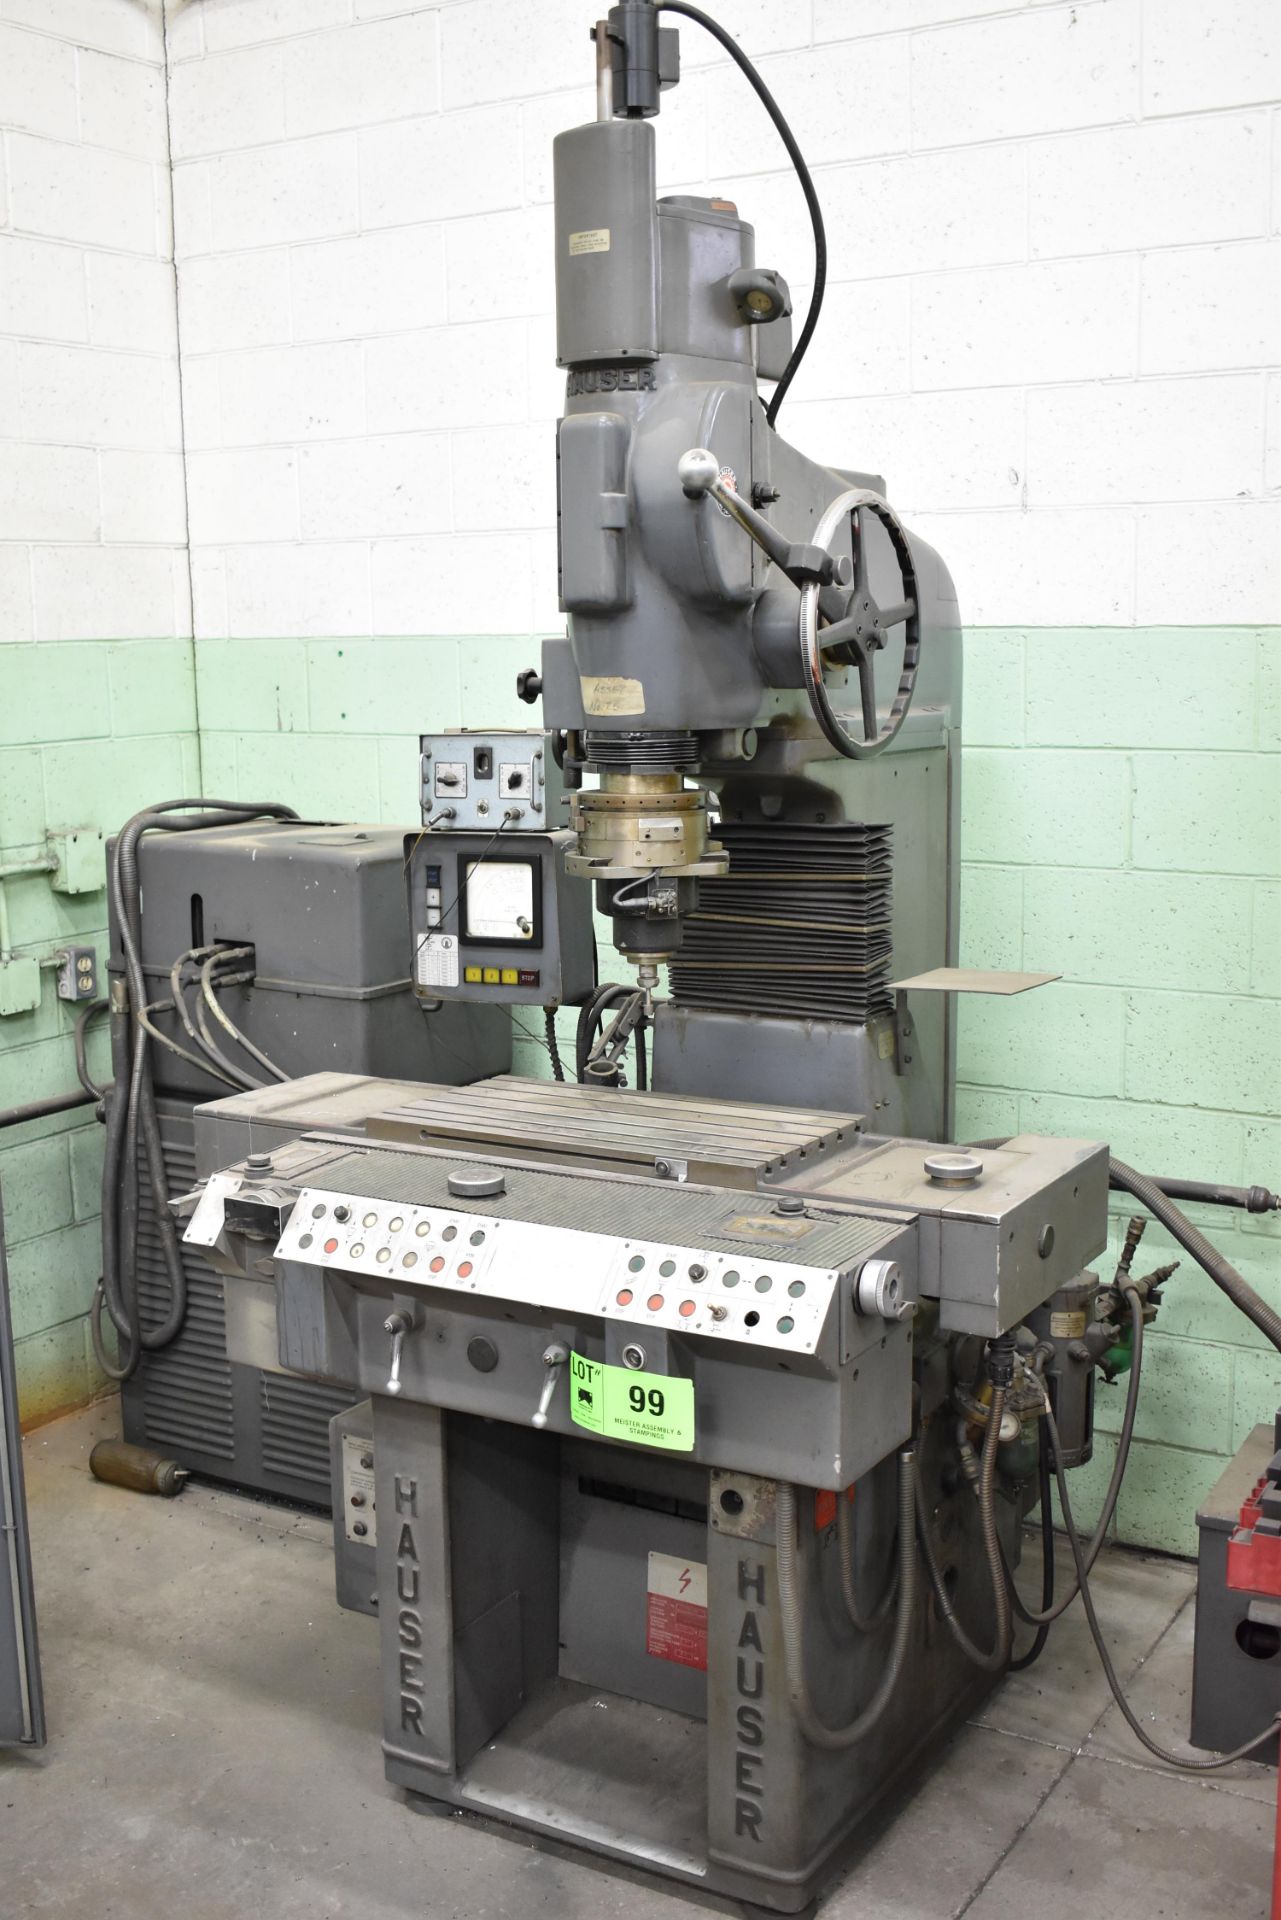 HENRI HAUSER 3SM.O JIG GRINDER WITH SPEEDS TO 80,000RPM, 12.5" X 23.25" T-SLOT TABLE, S/N: 80 [ - Image 2 of 10